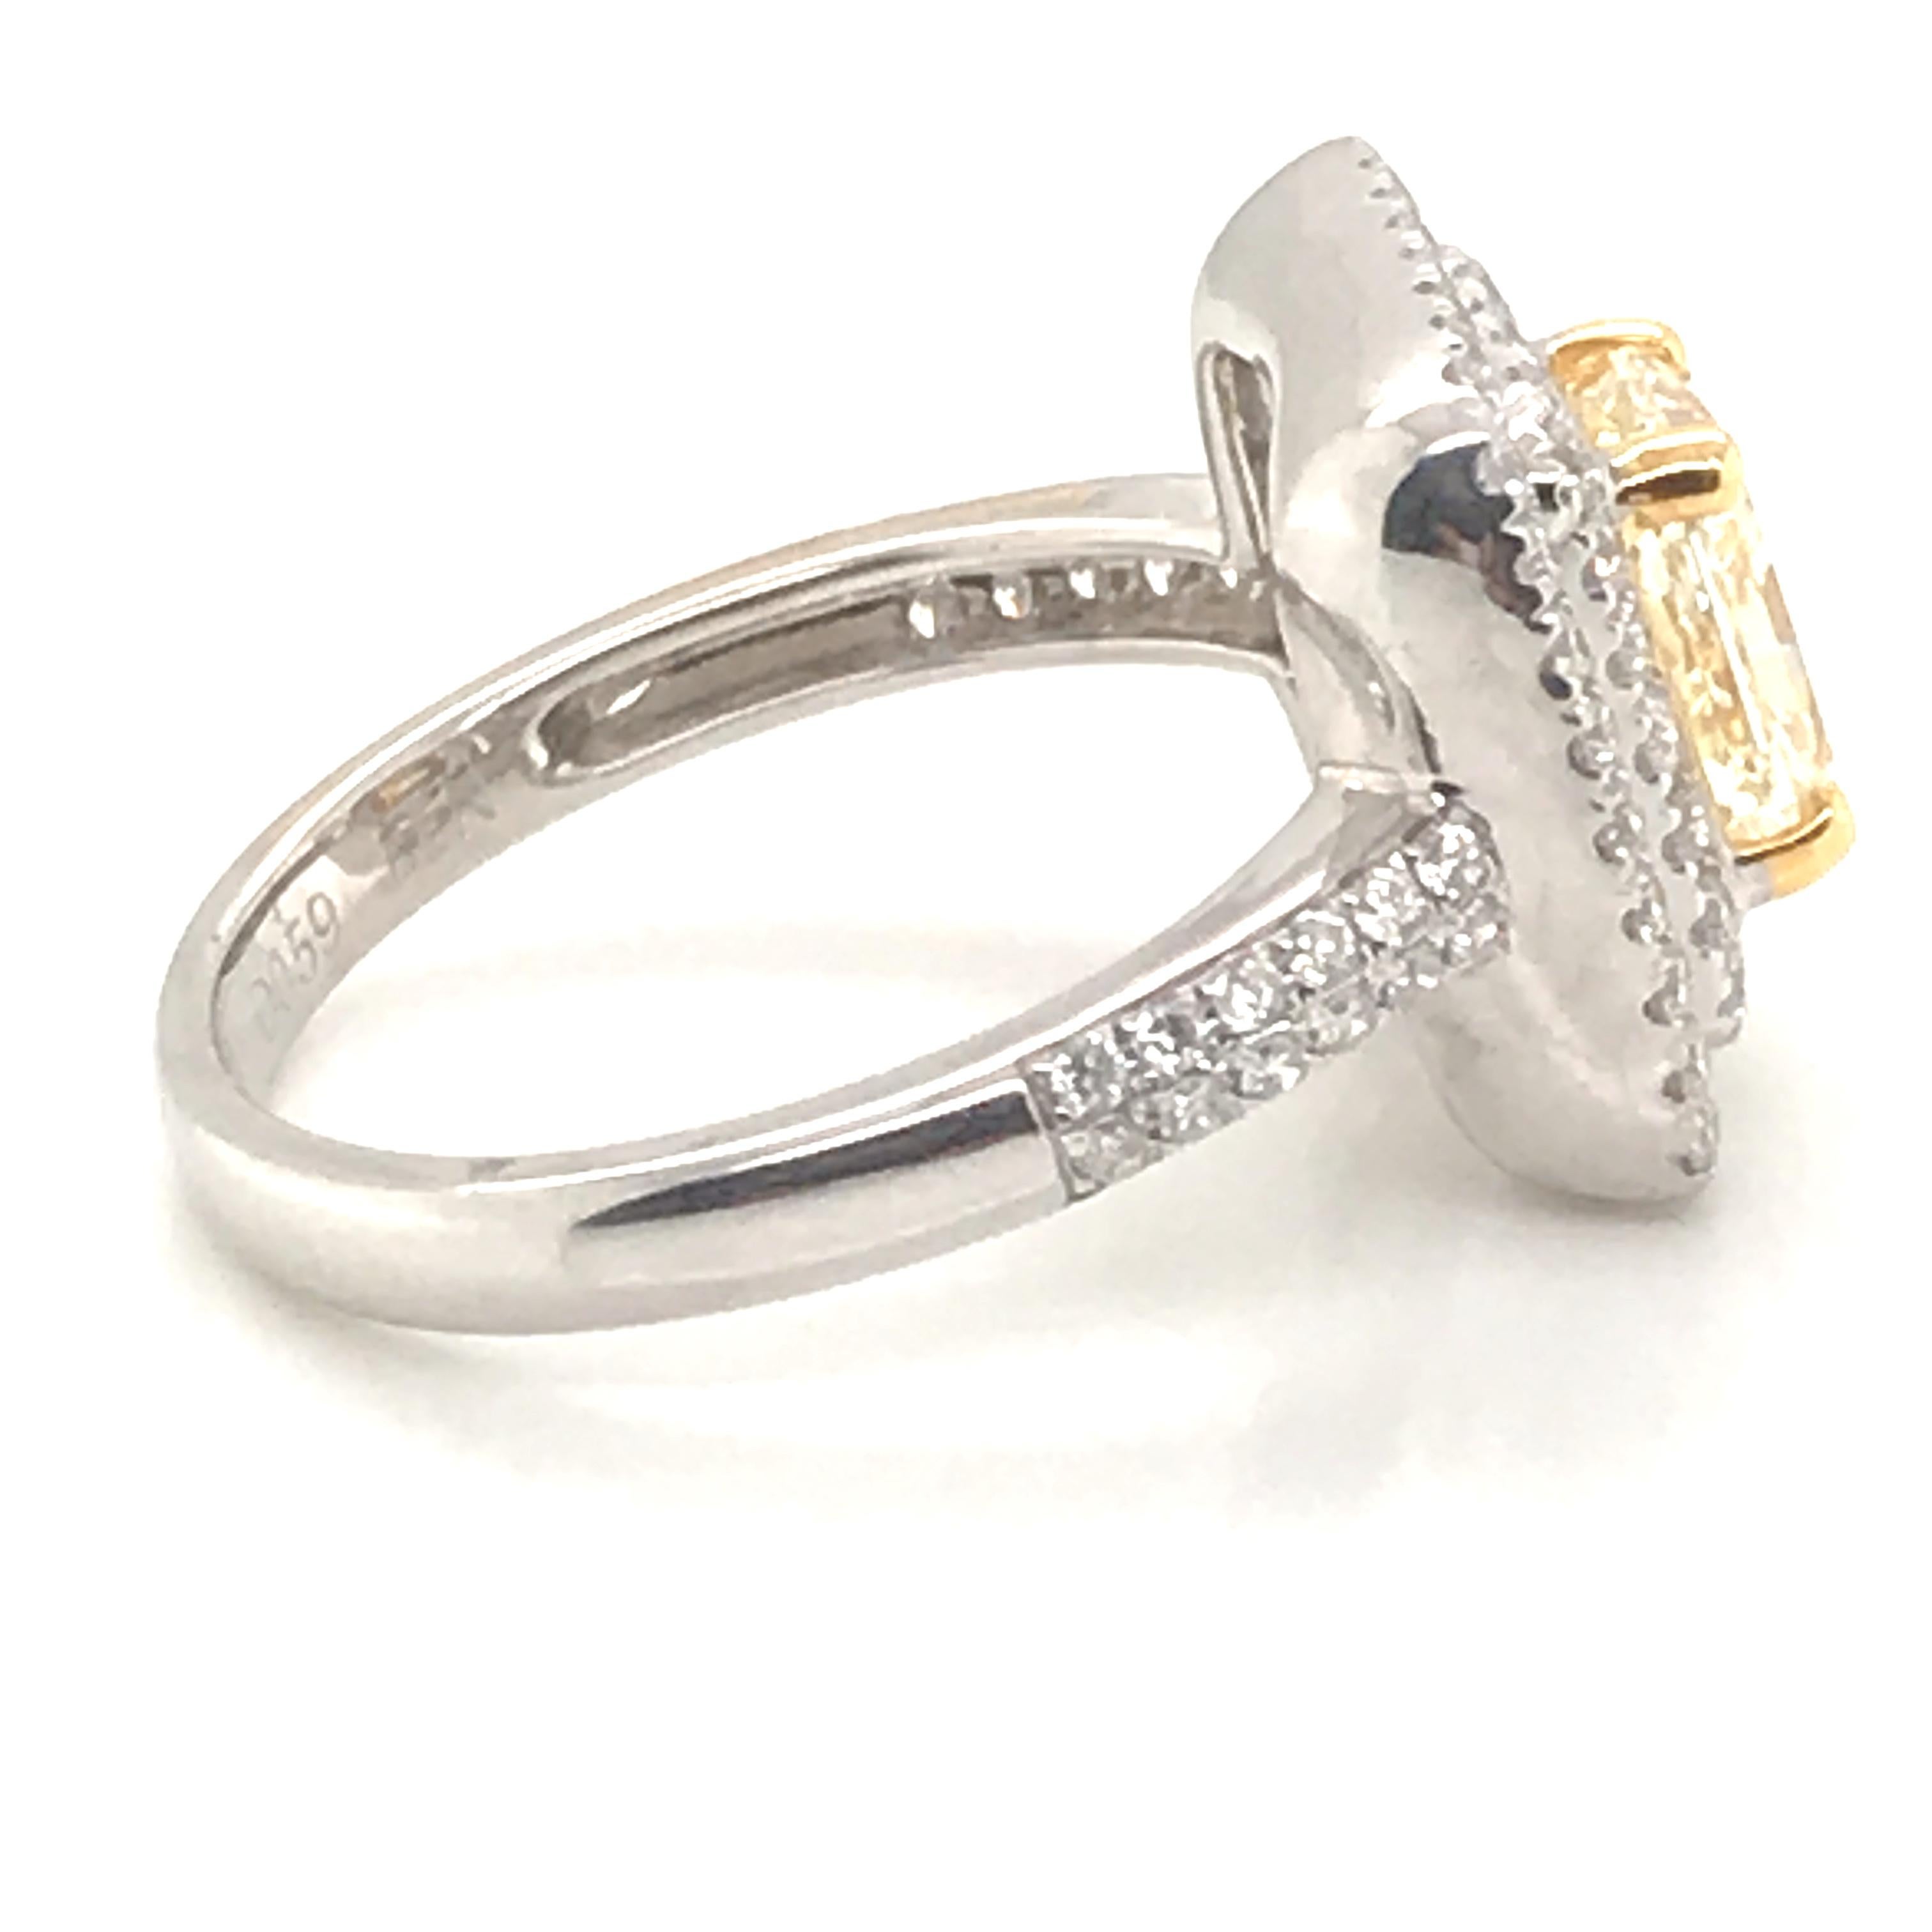 Round Cut 2.11 Carat Natural Fancy Yellow Diamond Ring with 18 Karat White and Yellow Gold For Sale